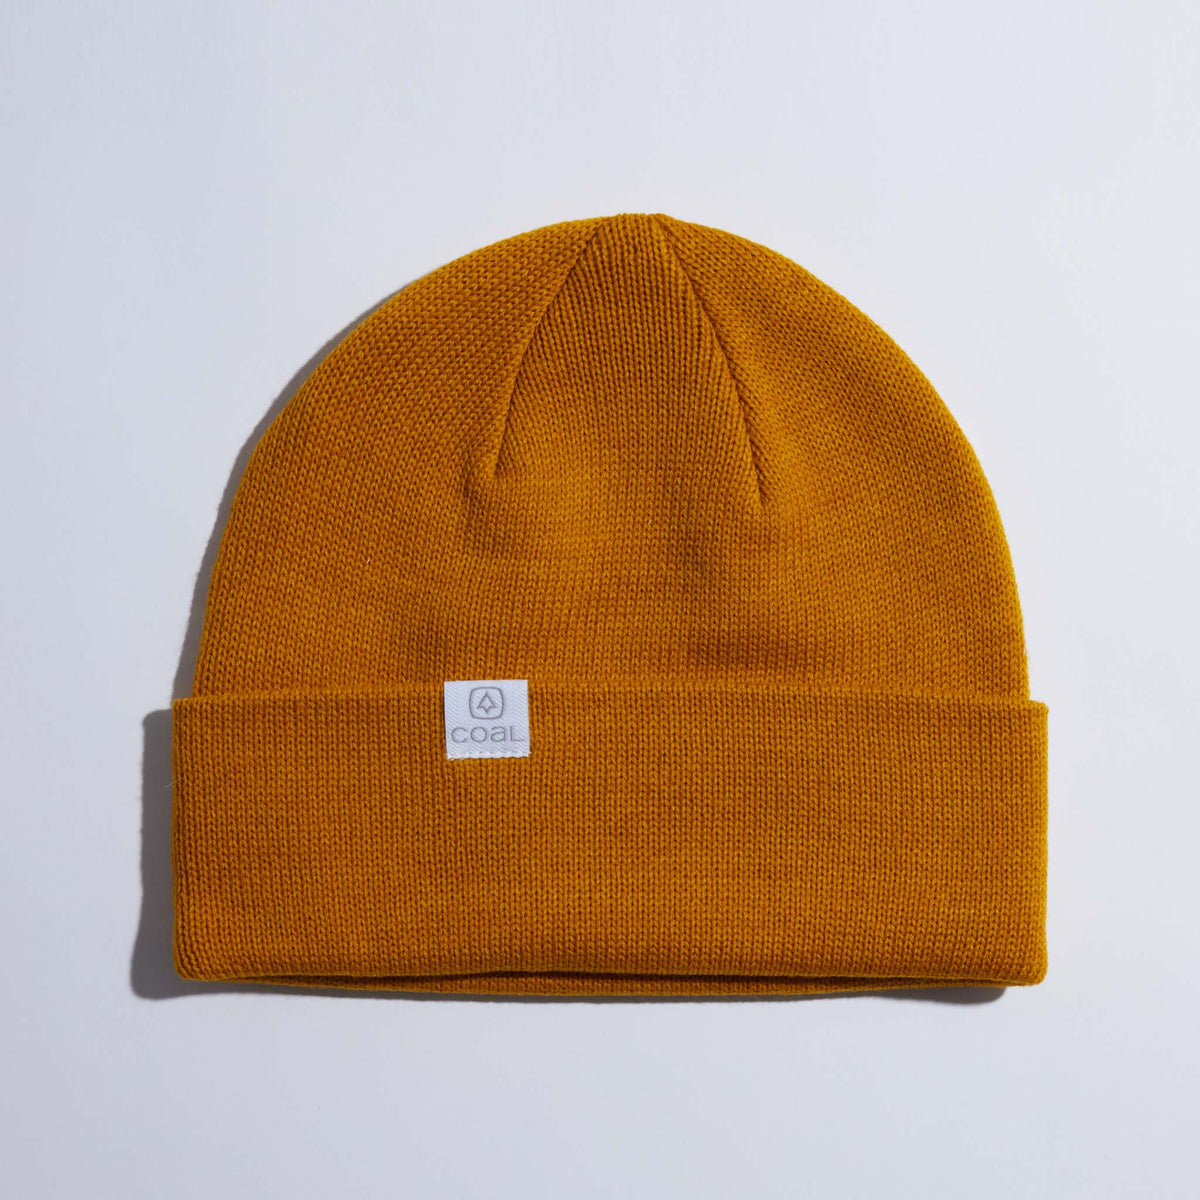 Coal Headwear | Quality Beanies, Hats, & Accessories For The Outdoors